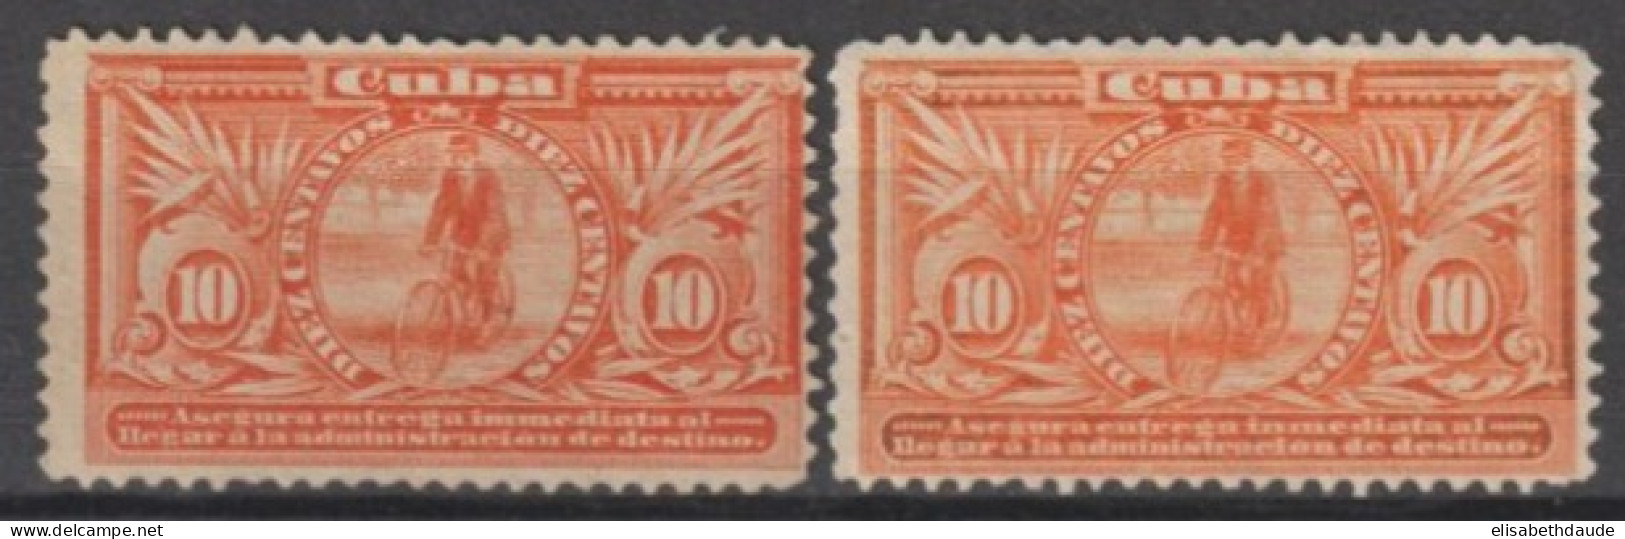 C UBA - 1899 - EXPRES - YVERT N°2 + VARIETE "IMMEDIATA" 2a (*) SANS GOMME - COTE = 65 EUR - Express Delivery Stamps